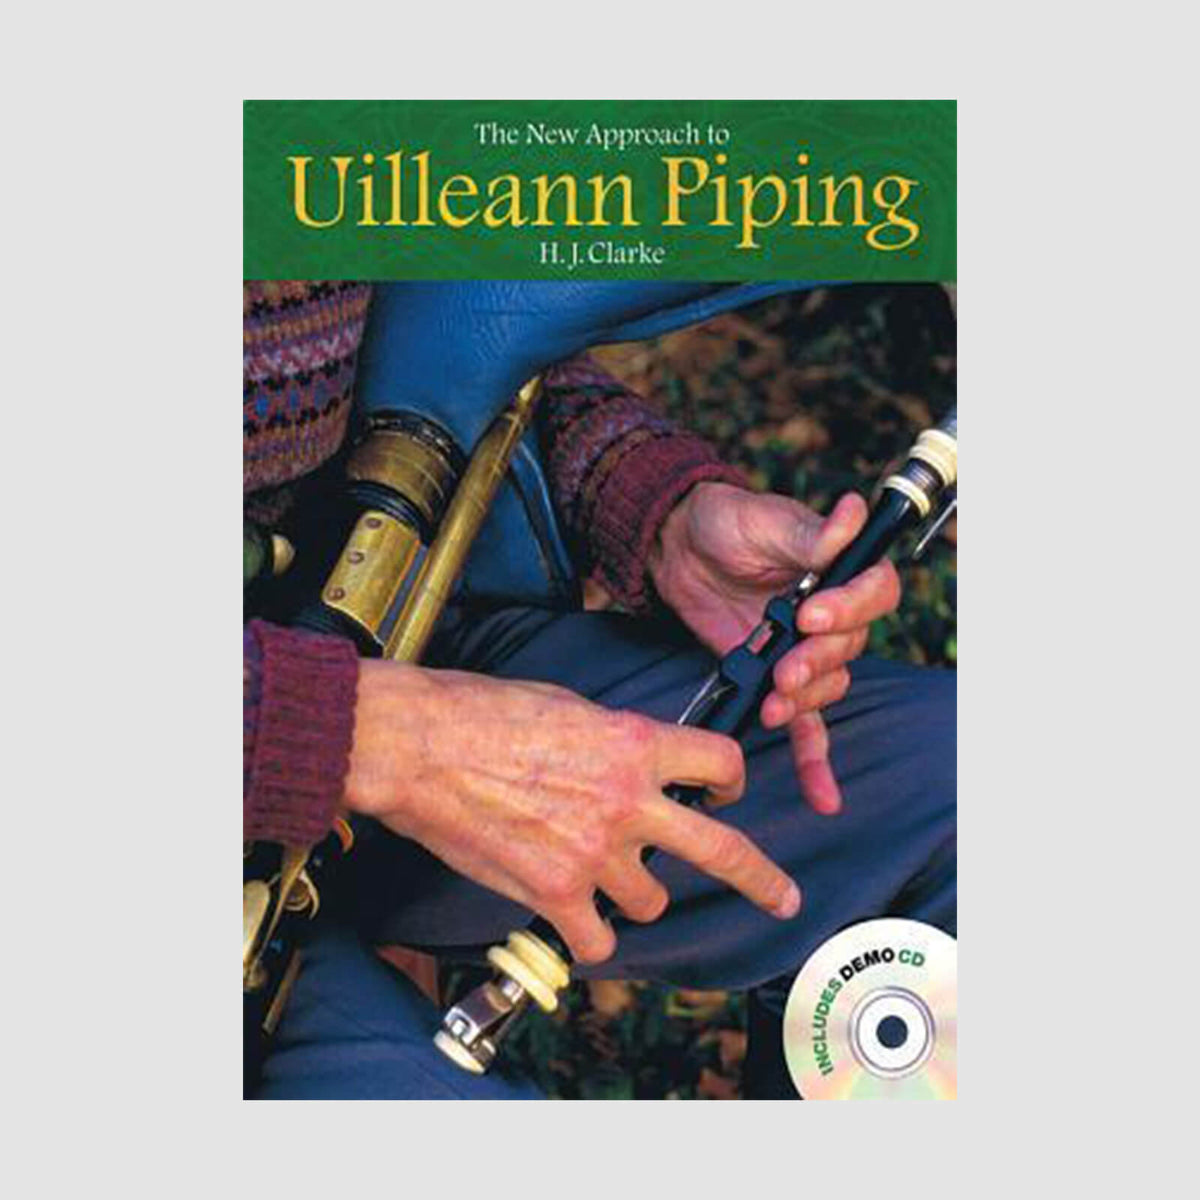 H.J. Clarke : The New Approach To Uilleann Piping